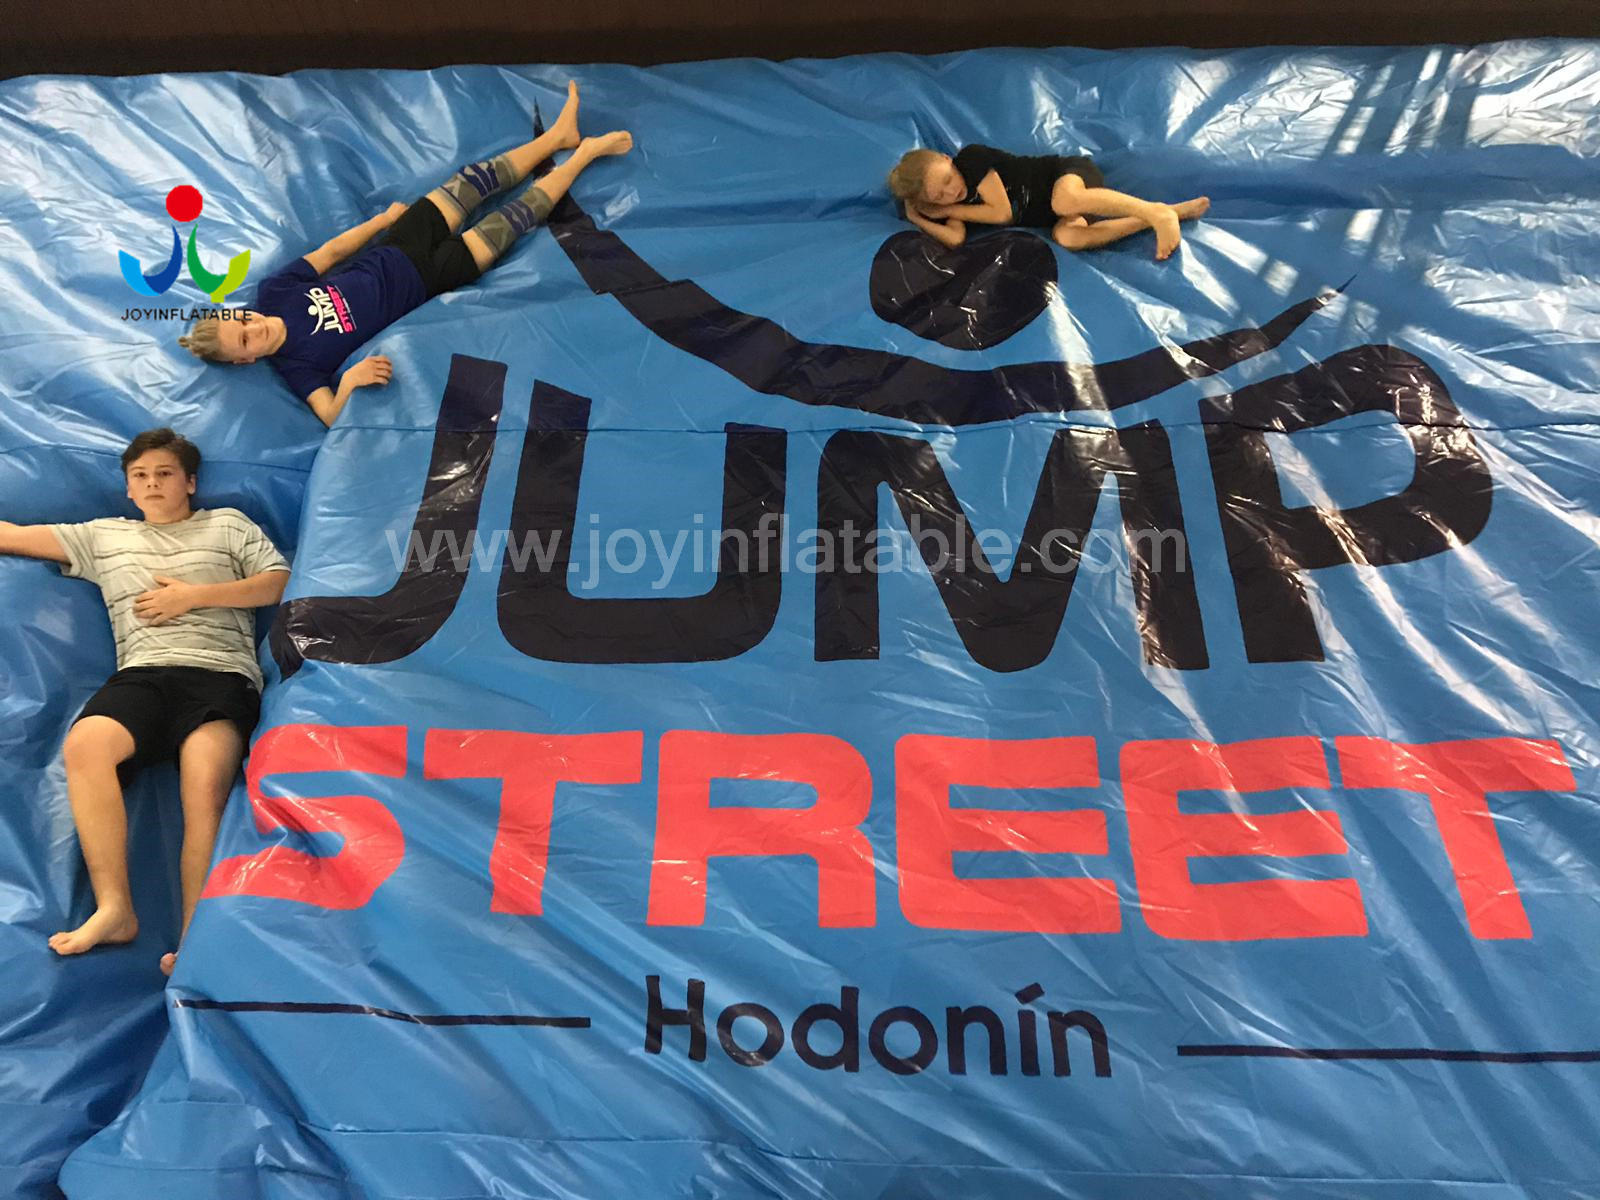 JOY inflatable bag jump airbag price manufacturers for skiing